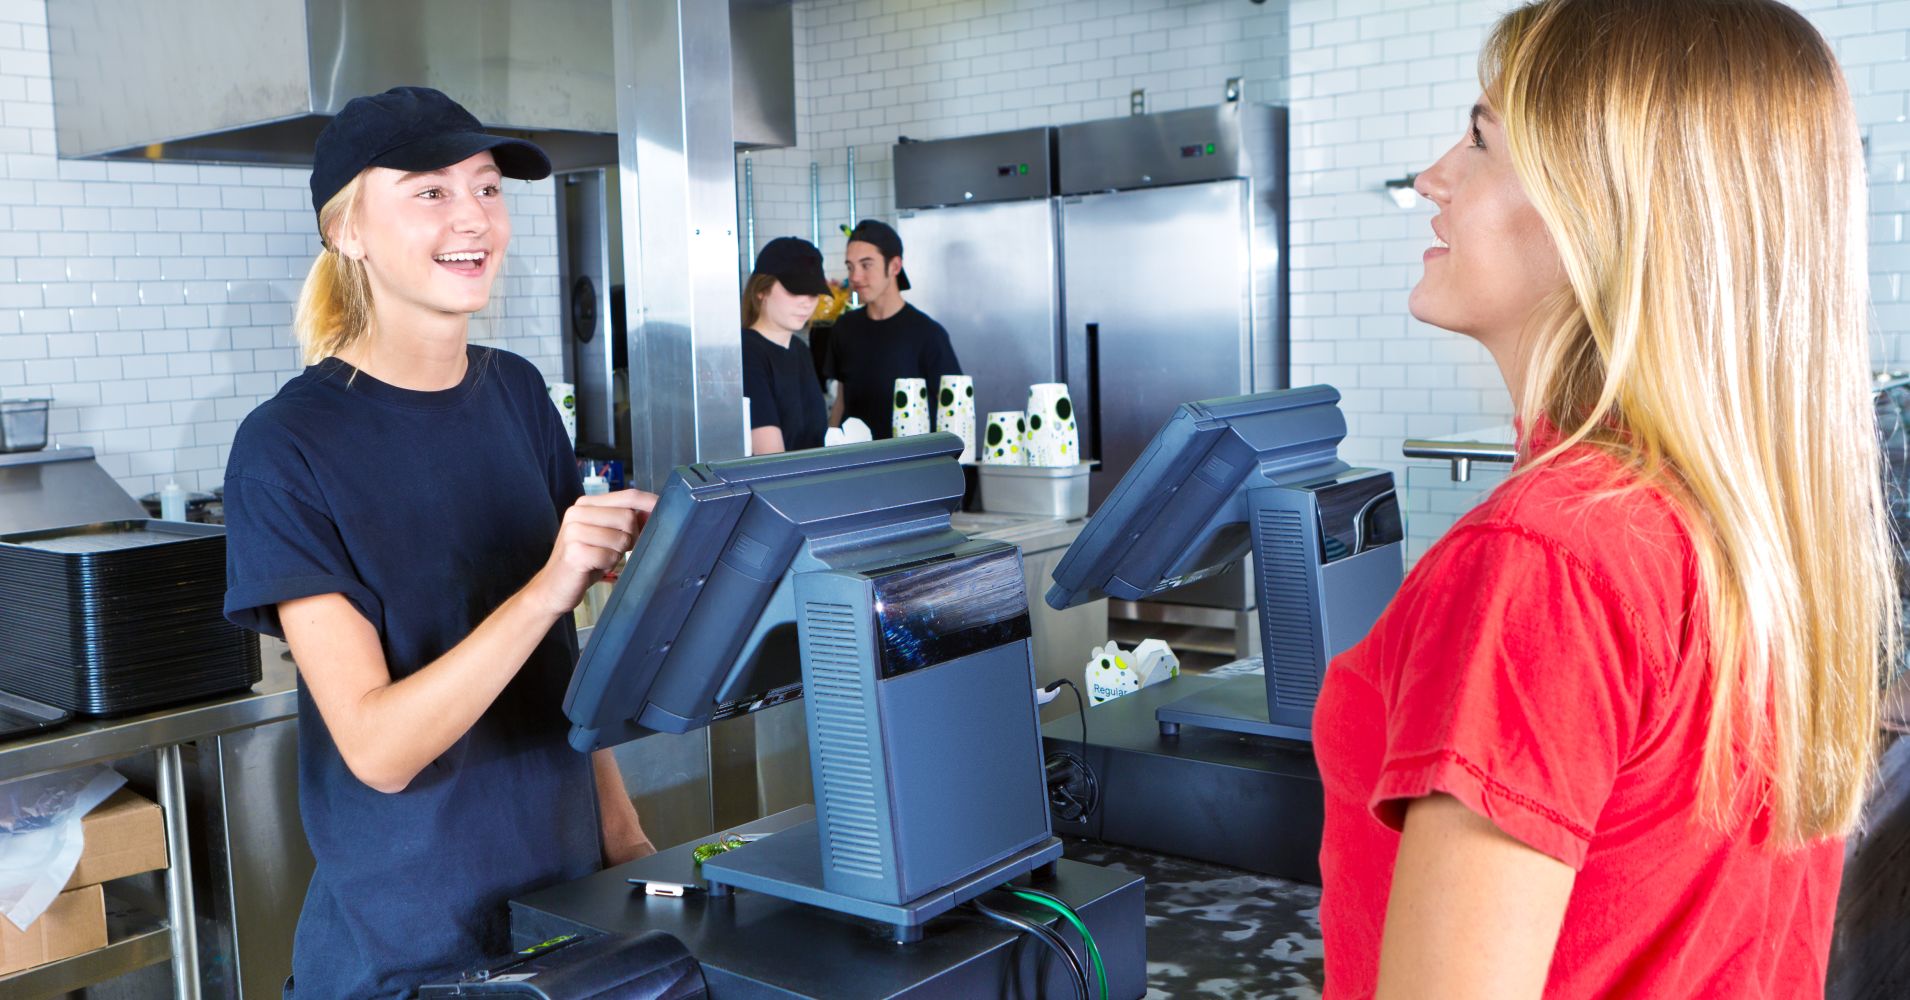 Checkout Server Serving Young Woman Customer Ordering at Fast Food Restaurant